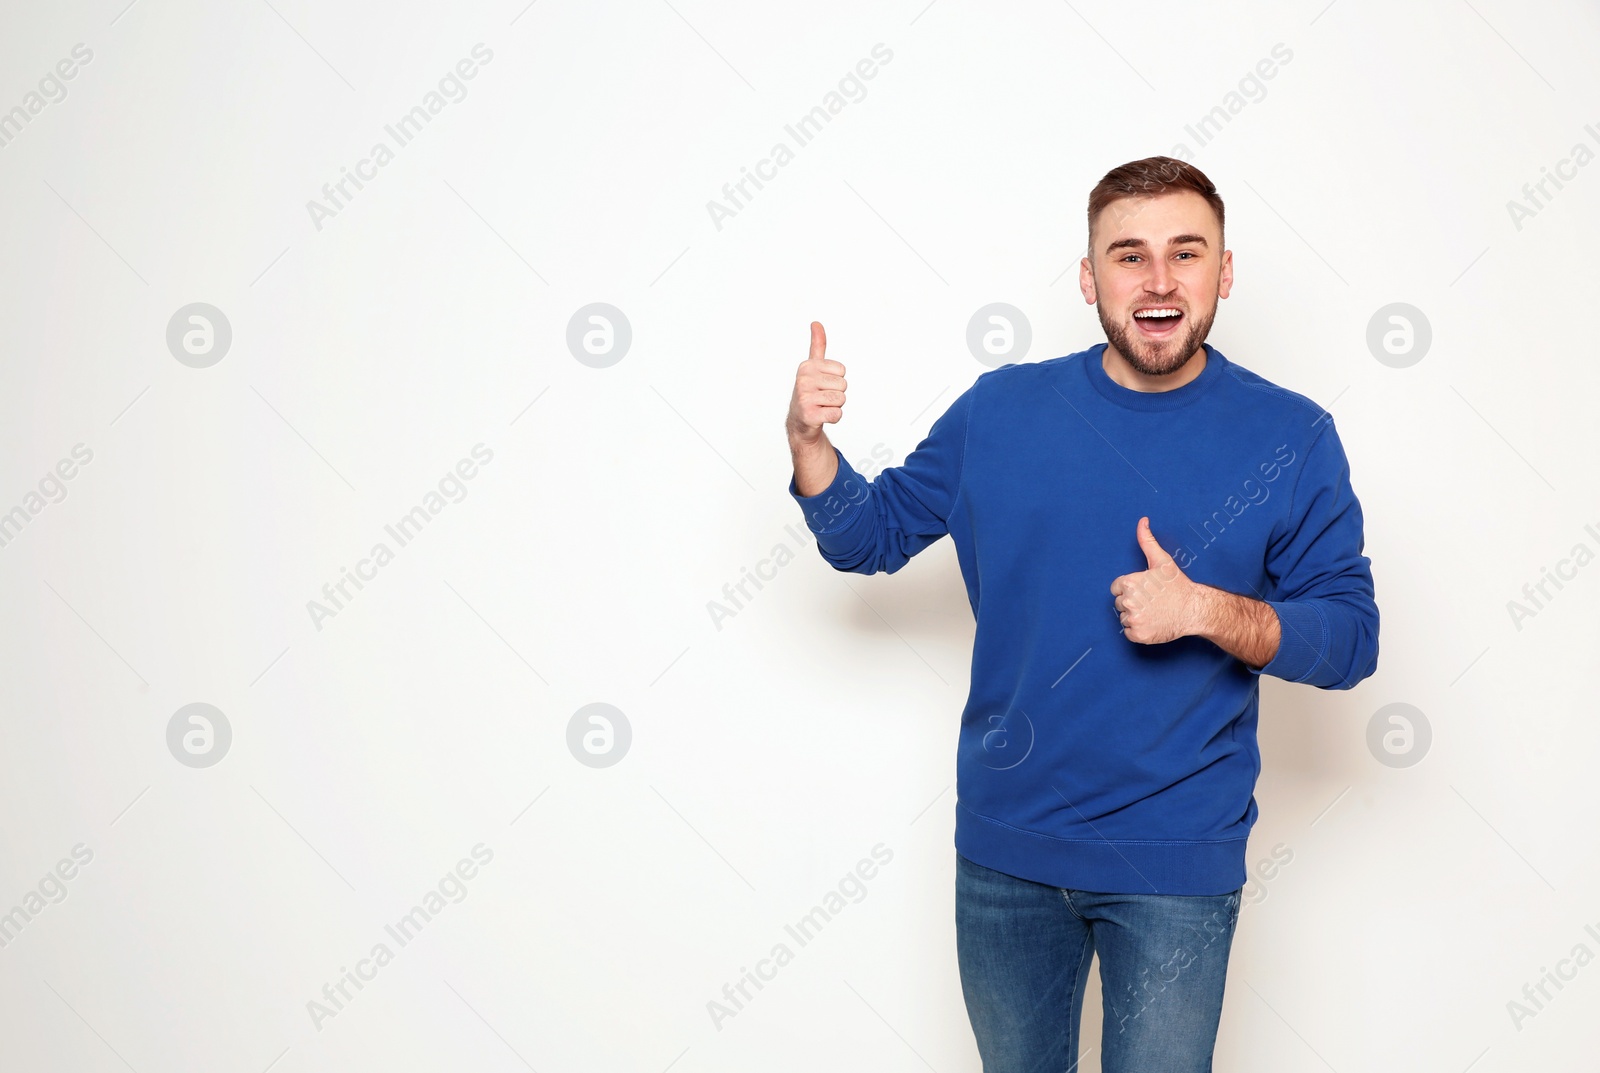 Photo of Portrait of emotional man showing thumbs up gesture on white background